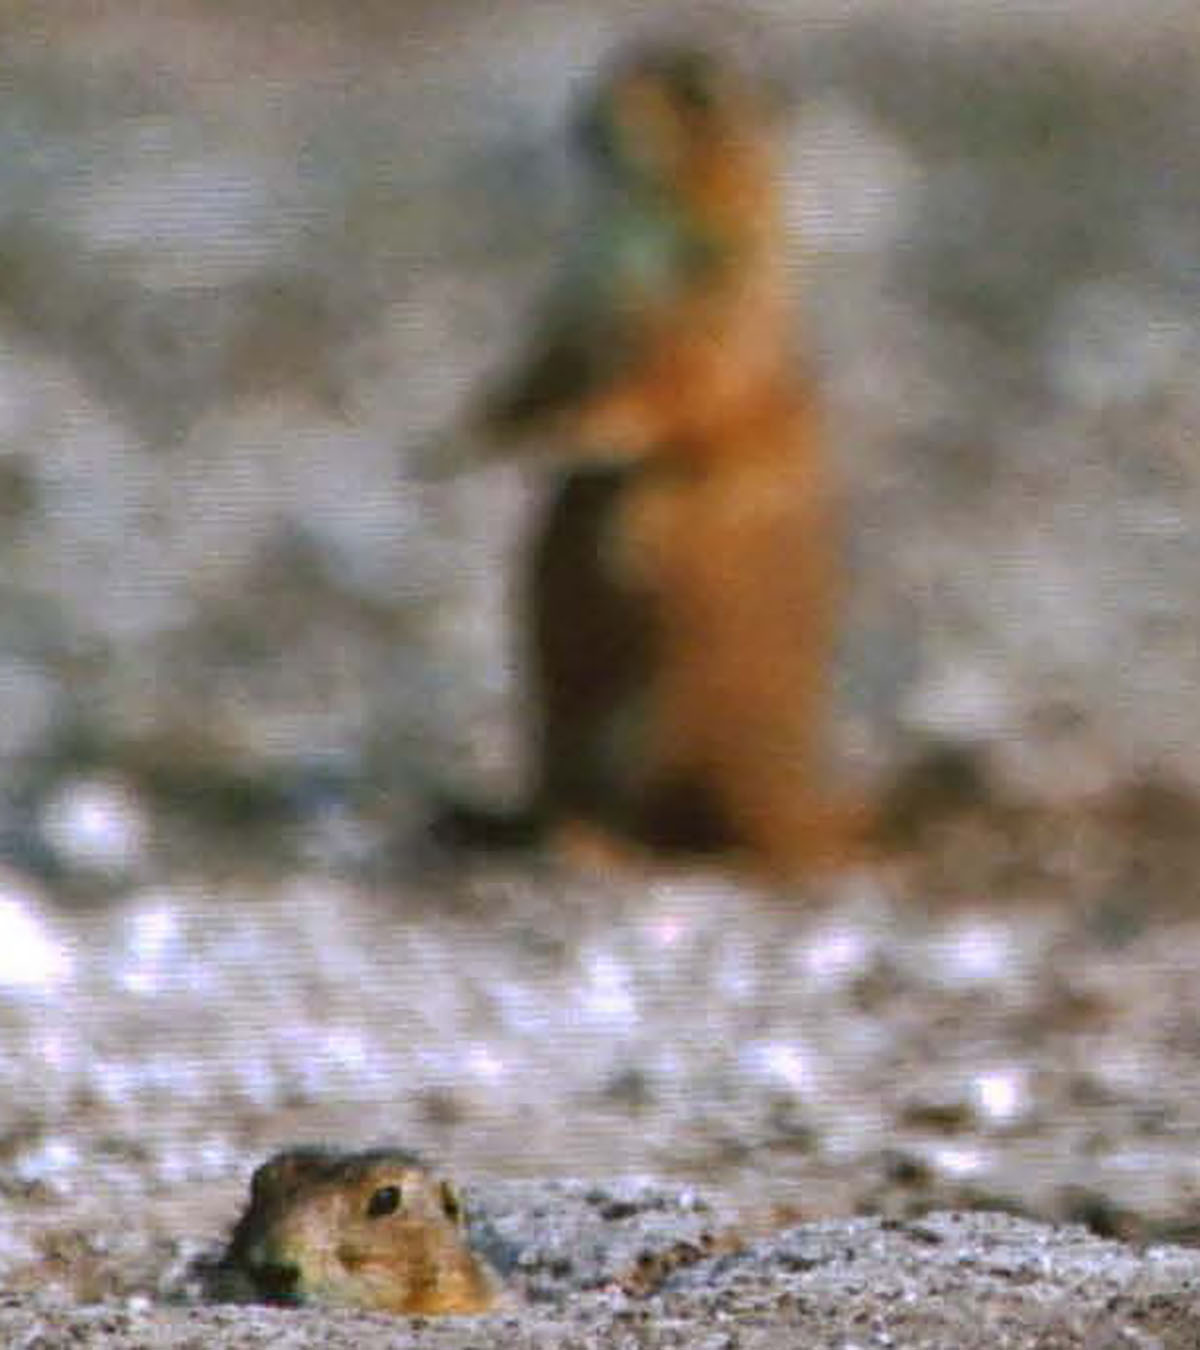 Prairie dog emerging from the ground and another prairie dog in background